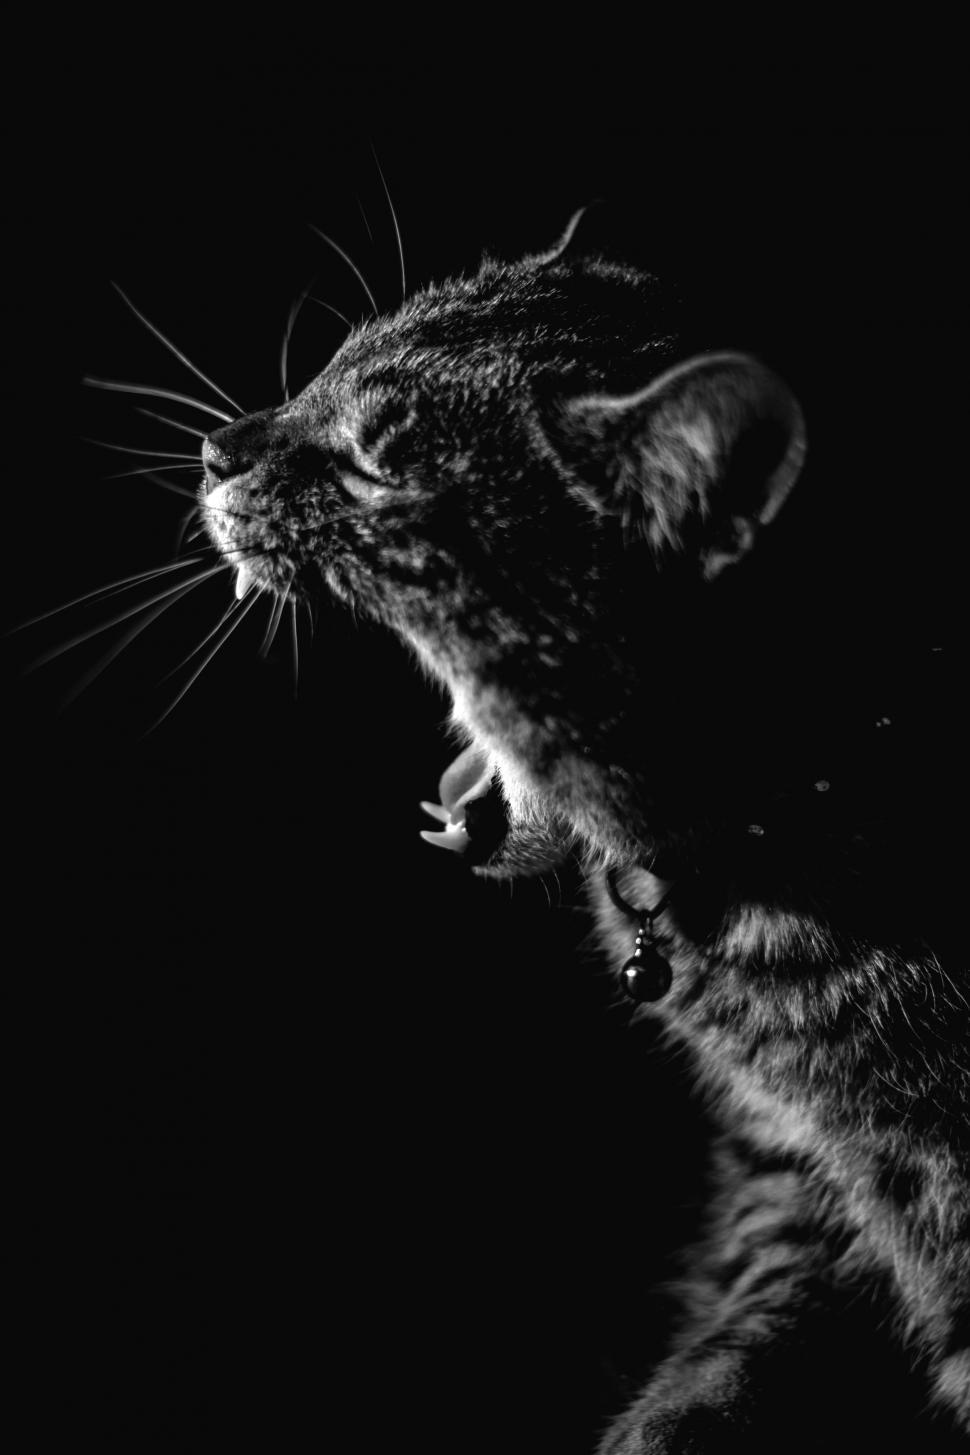 Free Image of Black and White Photo of a Cat Yawning 